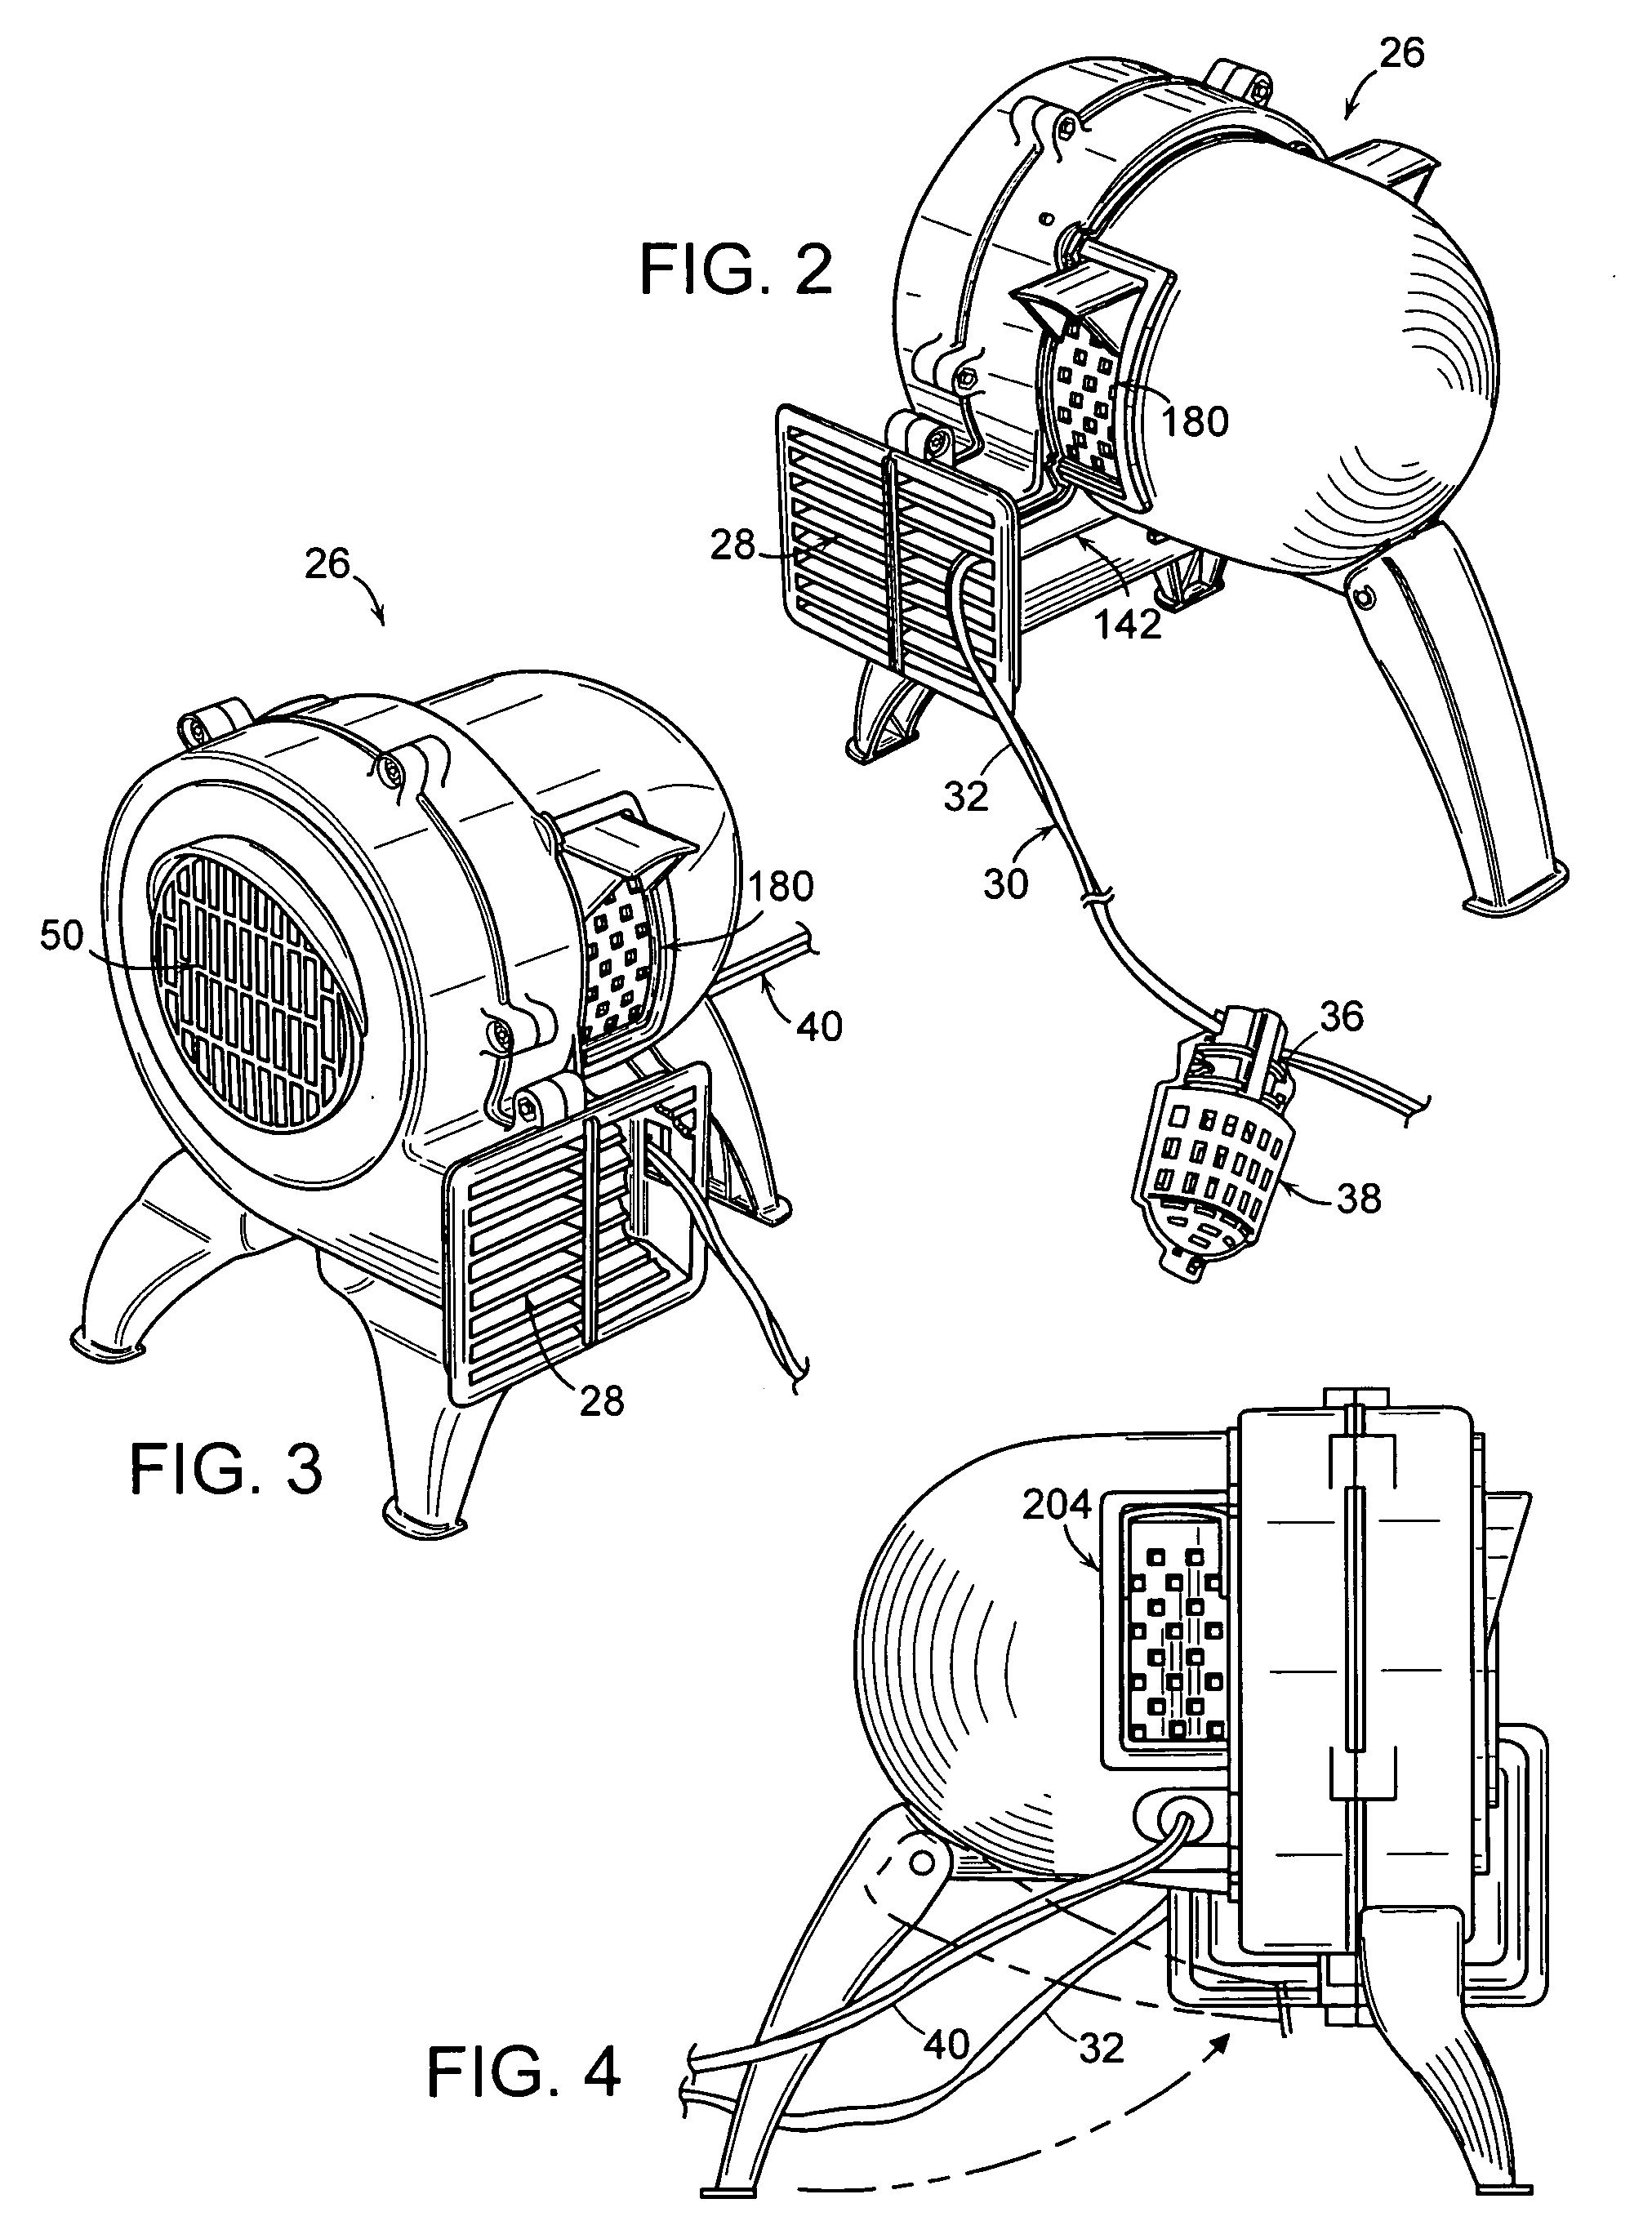 Air blower unit for inflatable body